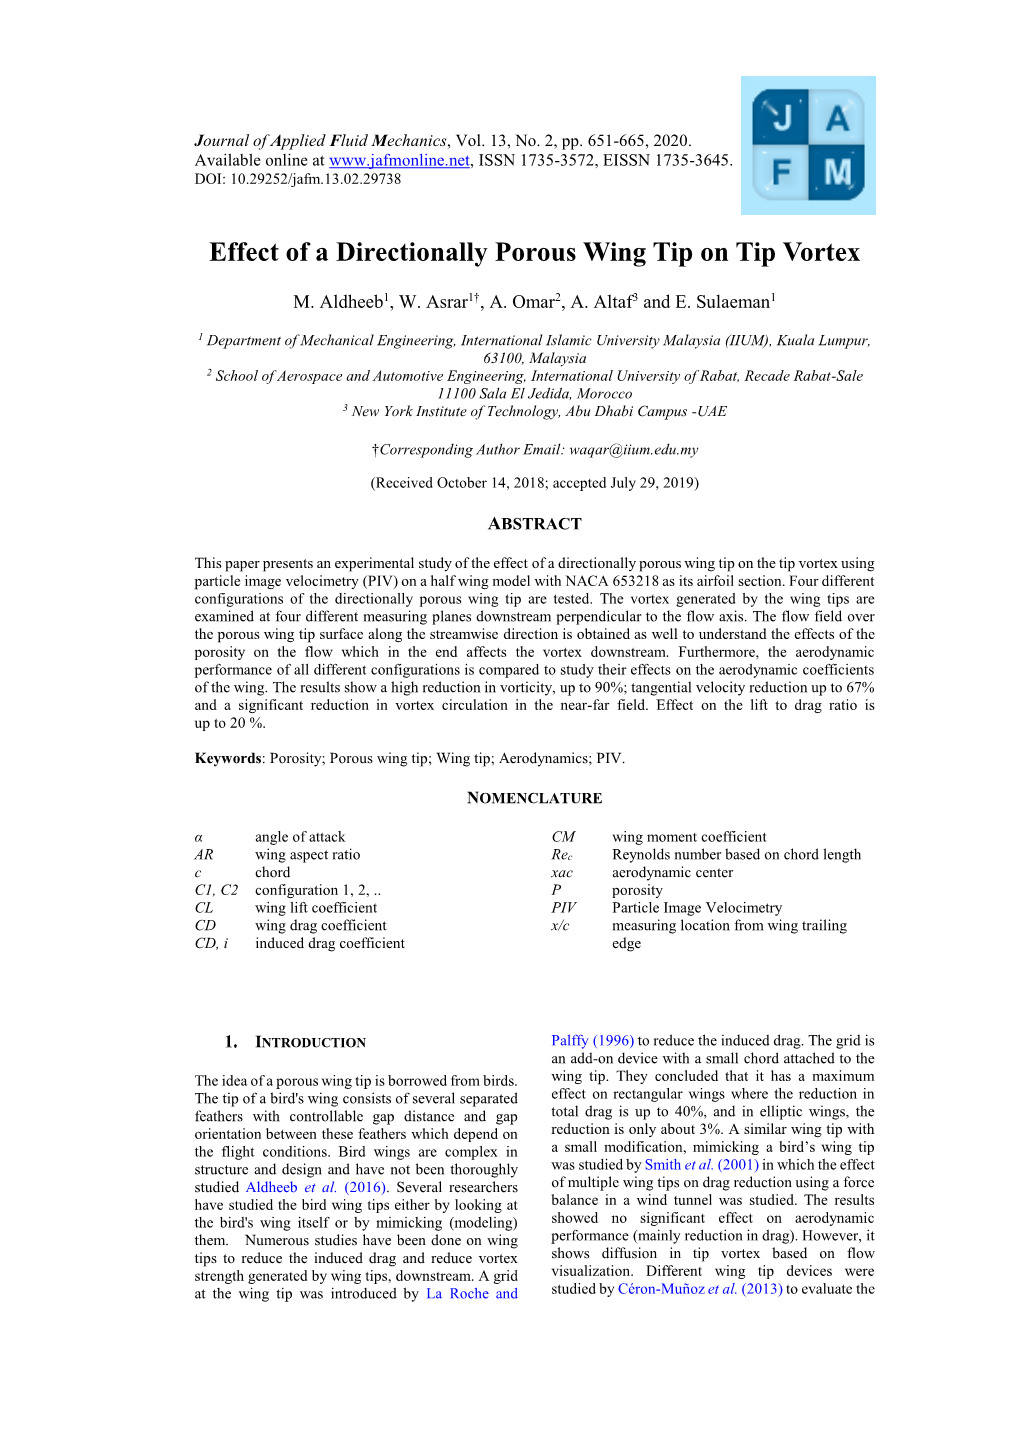 Effect of a Directionally Porous Wing Tip on Tip Vortex